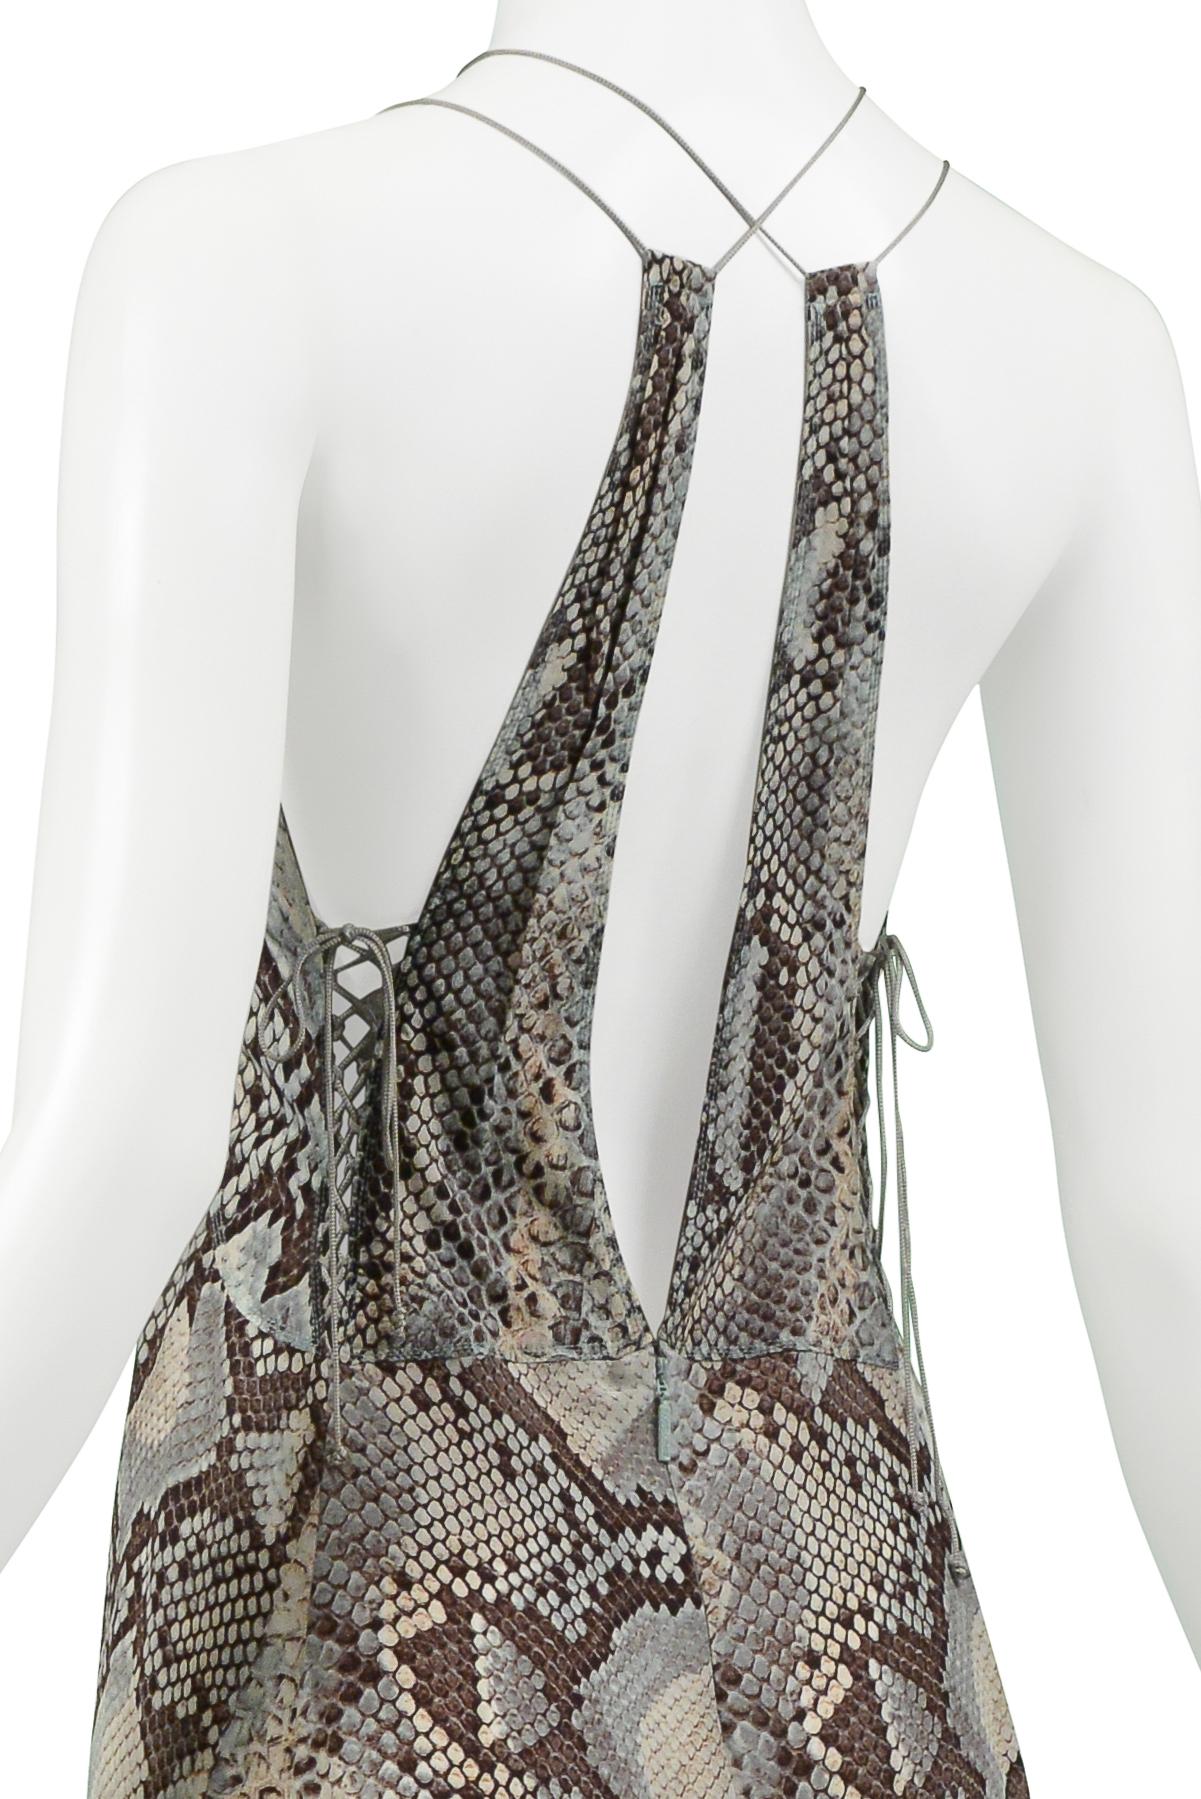 Roberto Cavalli Blue & Grey Snake Print Evening Gown With Silver Hardware 2011 For Sale 2